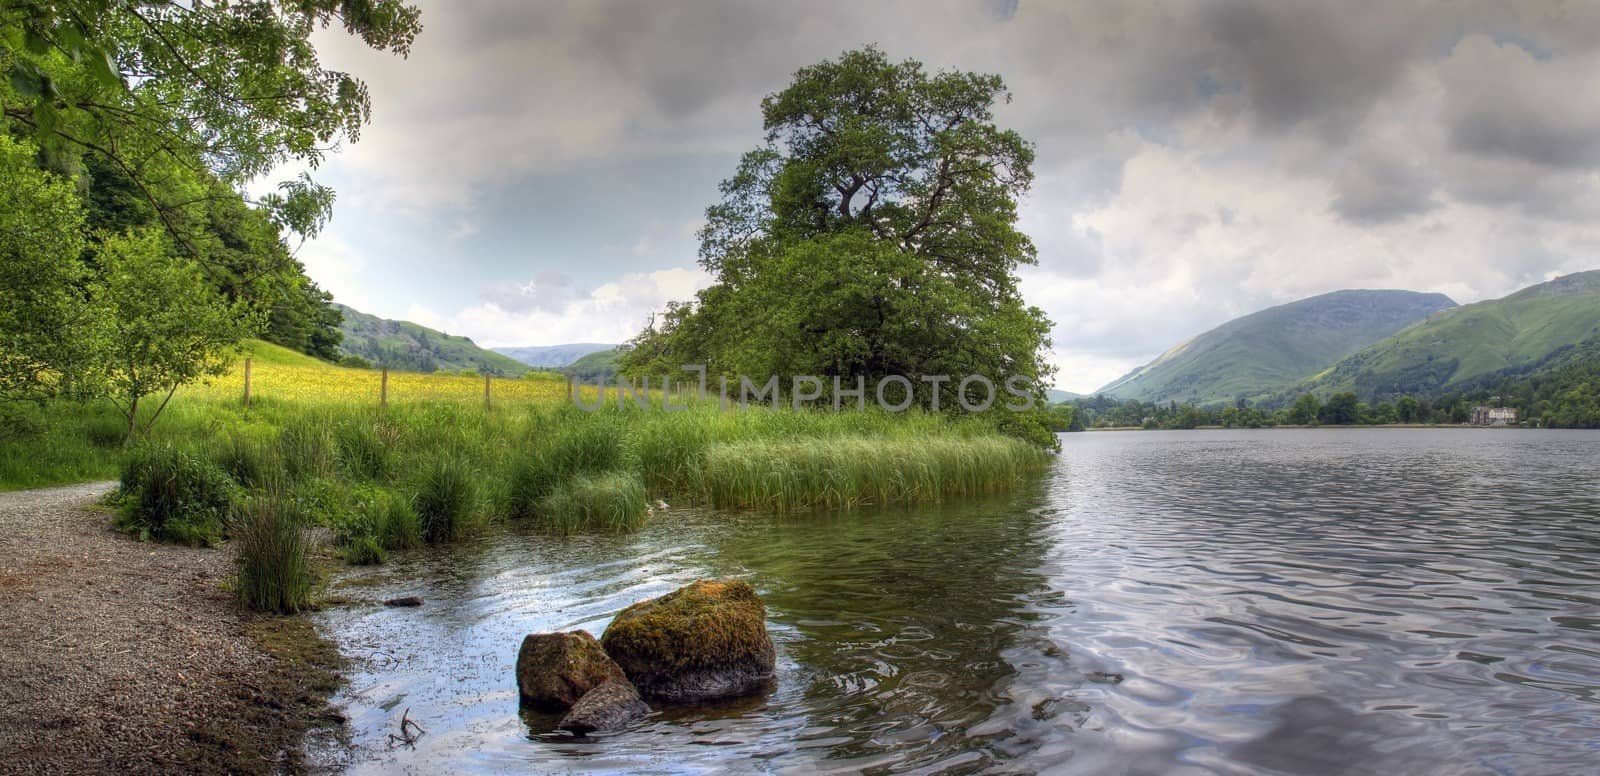 Grasmere Panorama by andrewroland